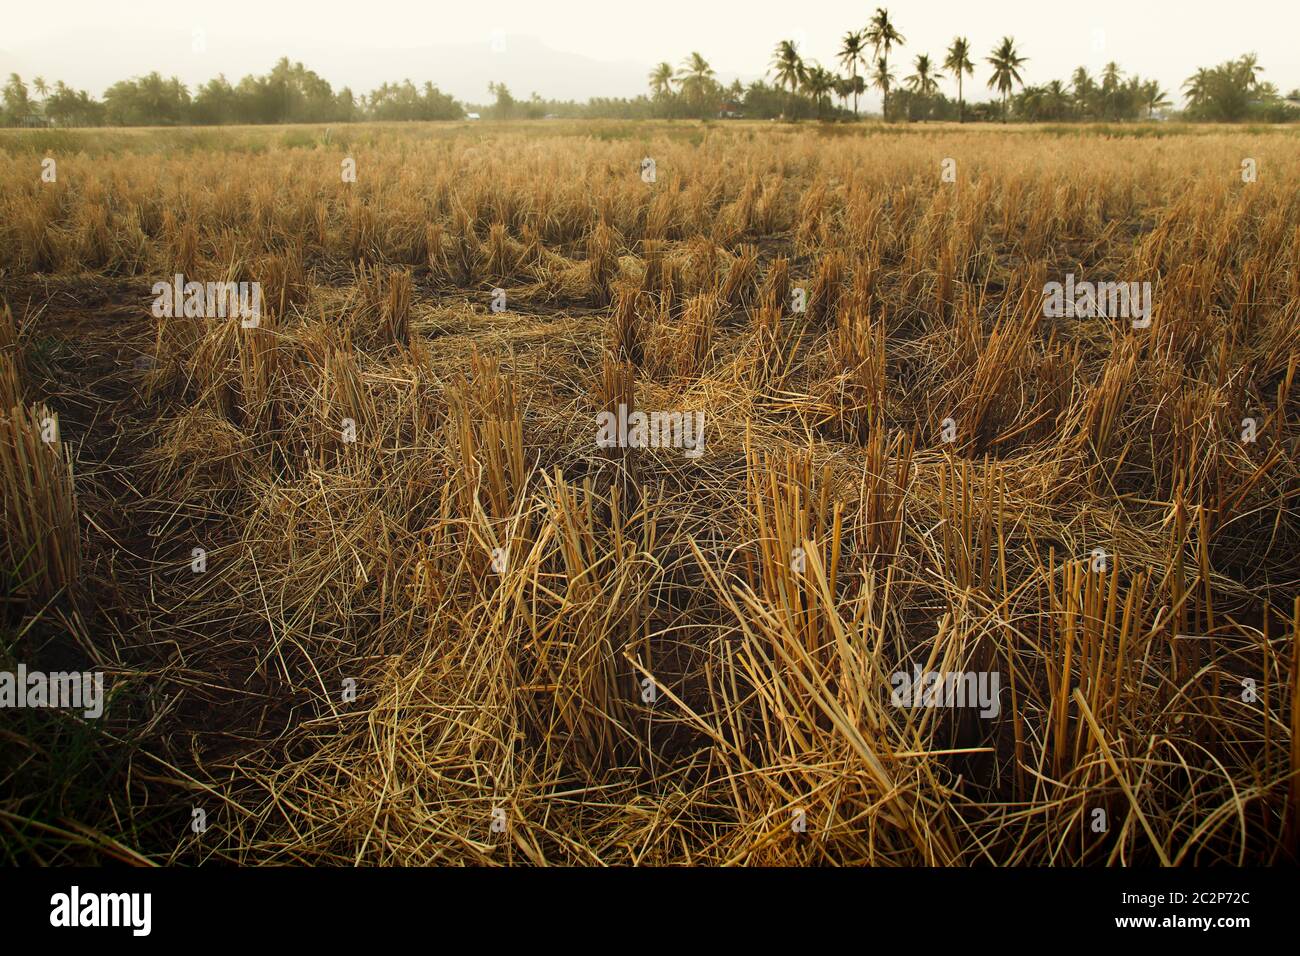 Rice fields devastated by prolonge drought due to climate change and global warming Stock Photo